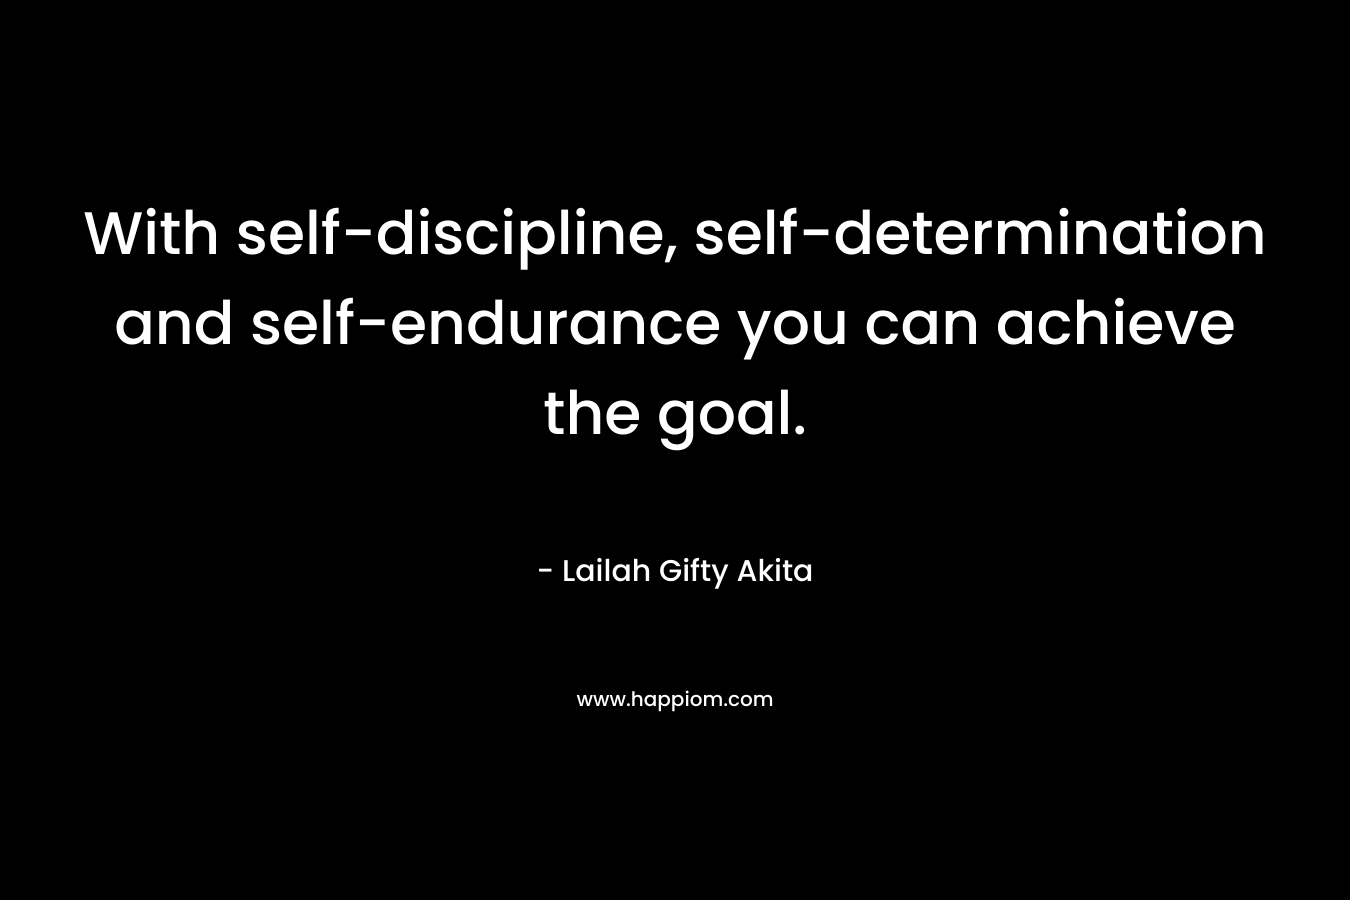 With self-discipline, self-determination and self-endurance you can achieve the goal. – Lailah Gifty Akita